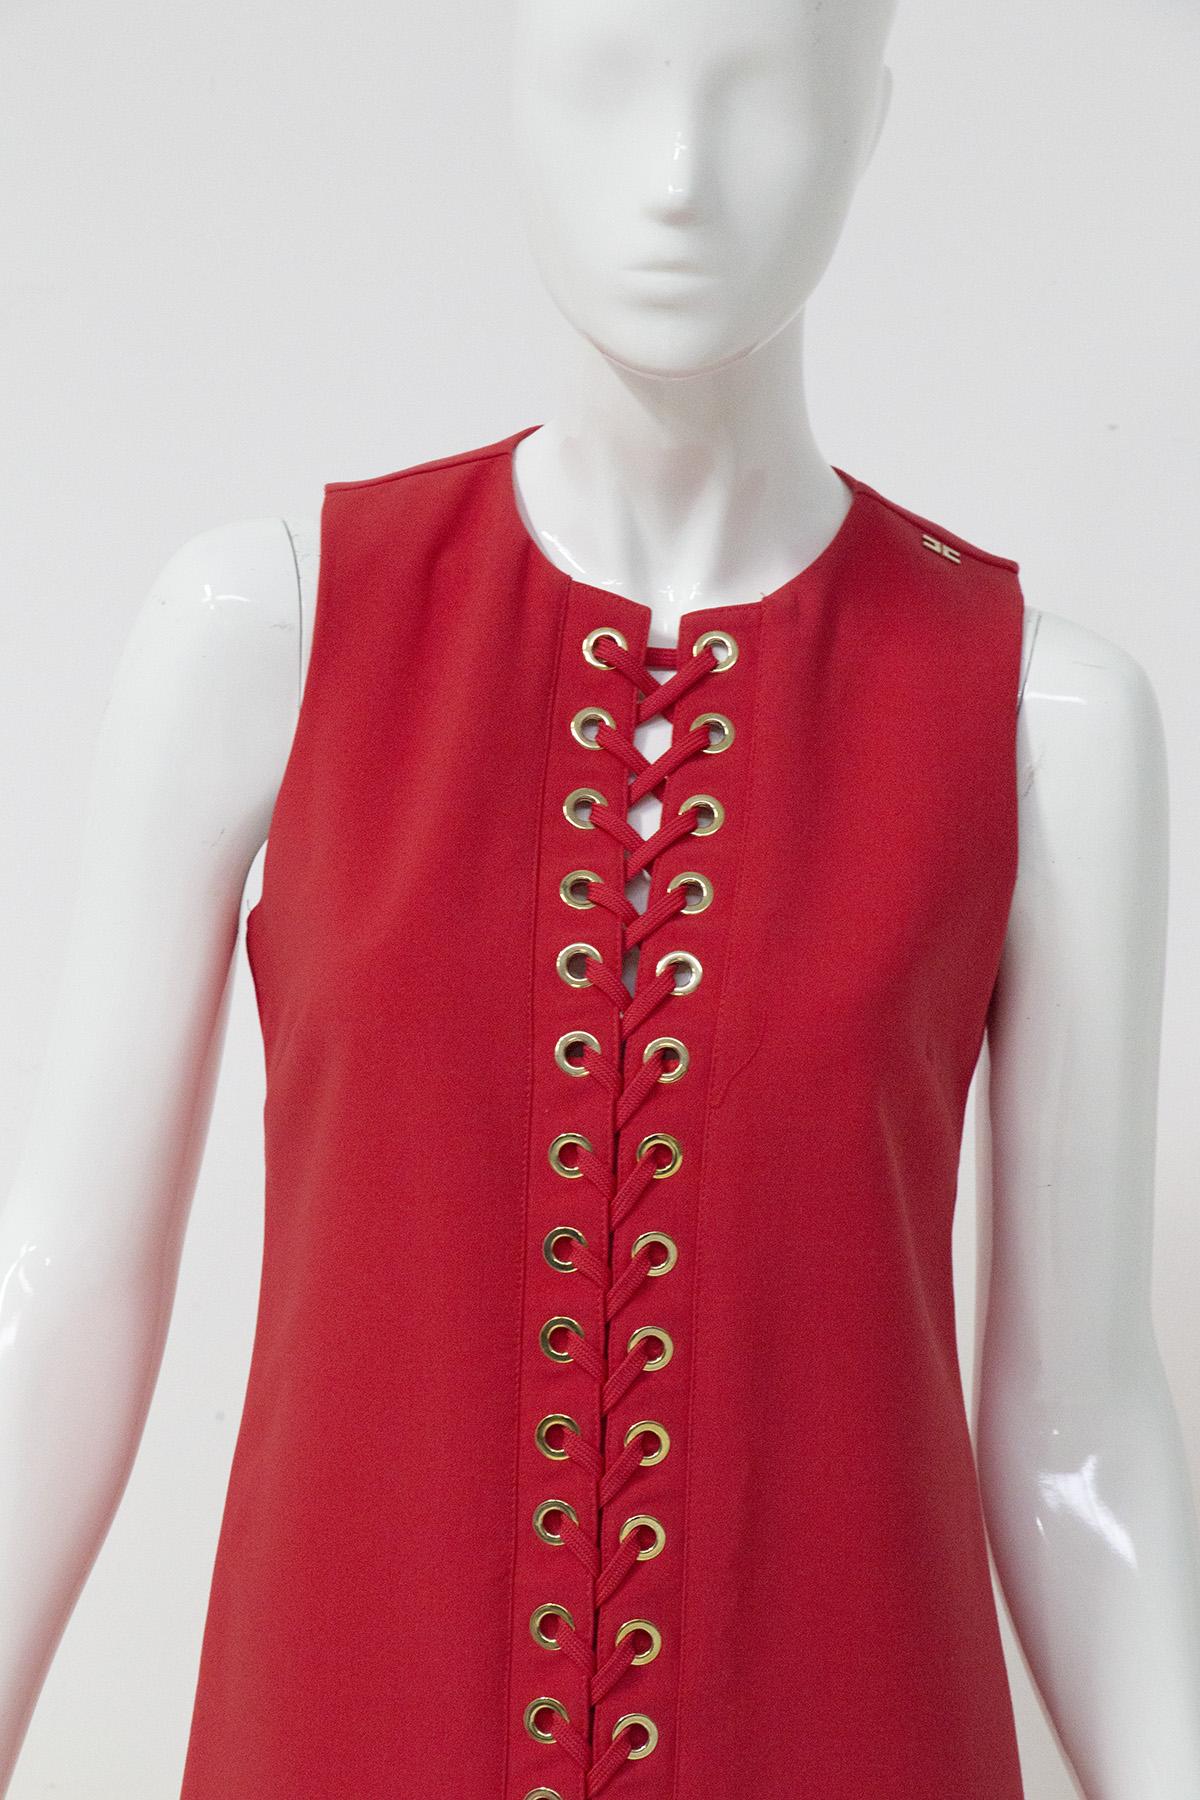 Gorgeous red dress designed by the great Italian stylist Elisabetta Franchi in the 1990s, of fine Italian manufacture. ORIGINAL LABEL.
The dress is very simple, thigh-length.
The dress is pre-fitted and closes with a zip at the back. The dress is a